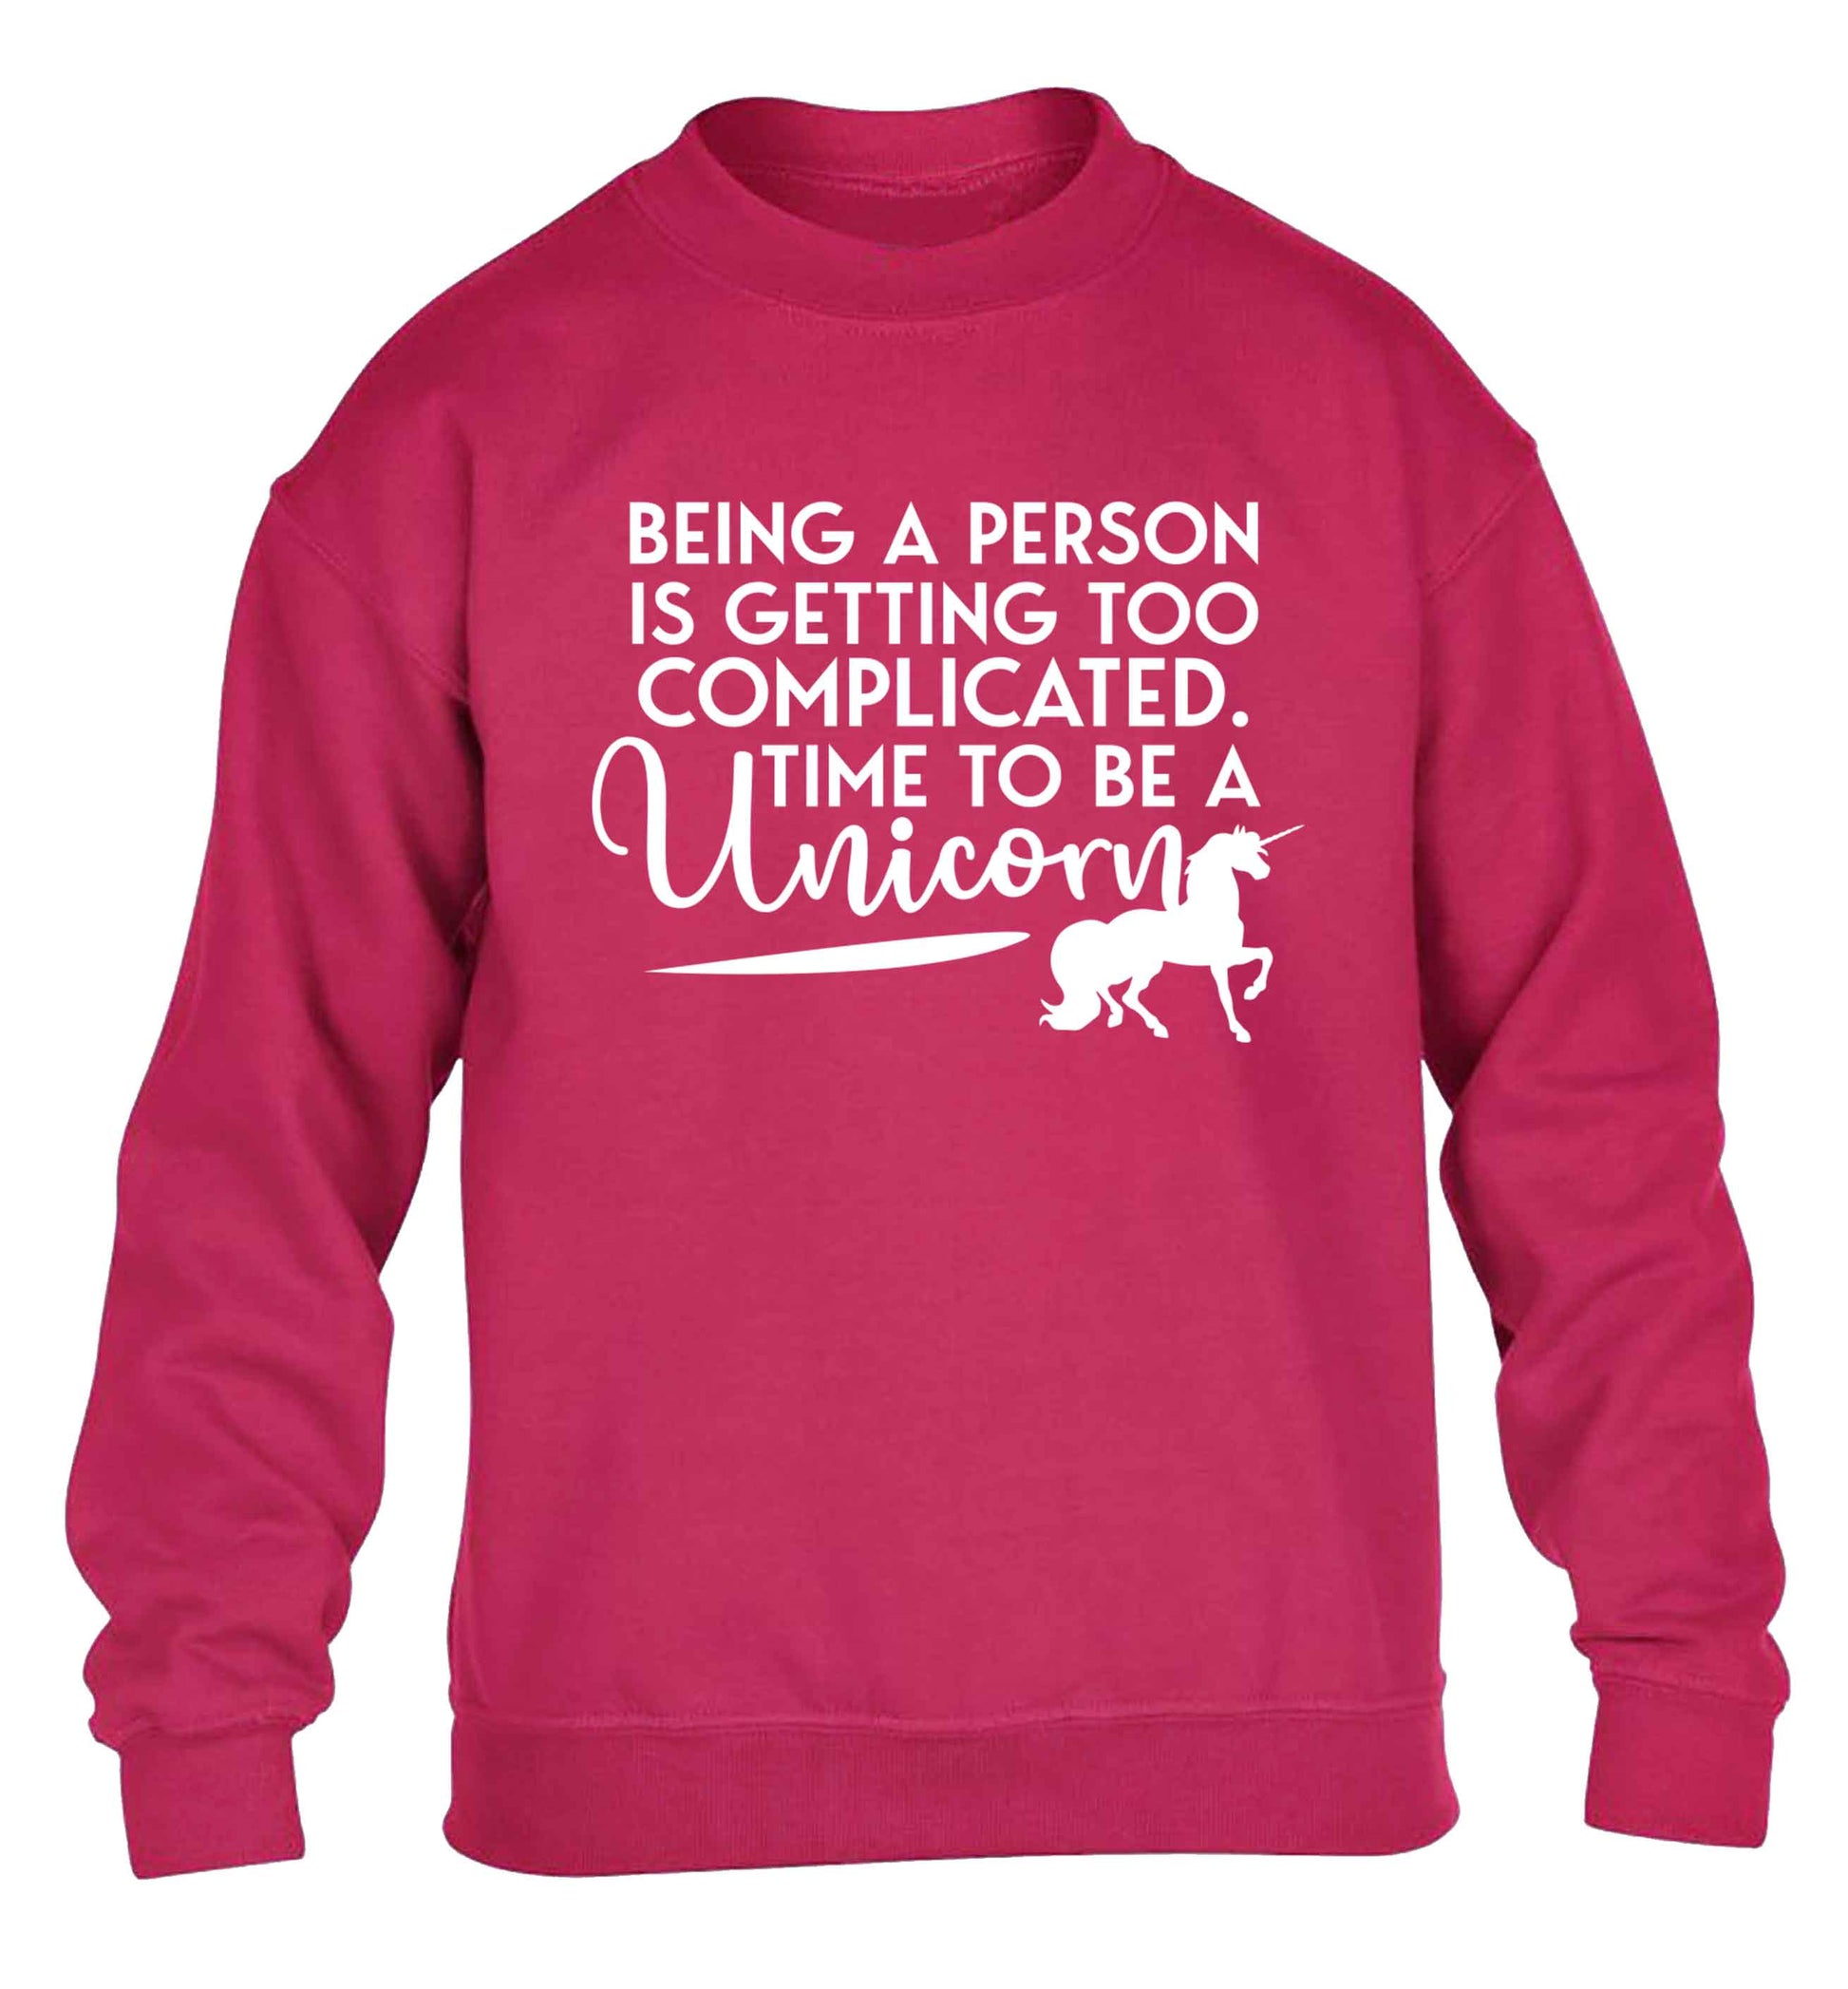 Being a person is getting too complicated time to be a unicorn children's pink sweater 12-13 Years